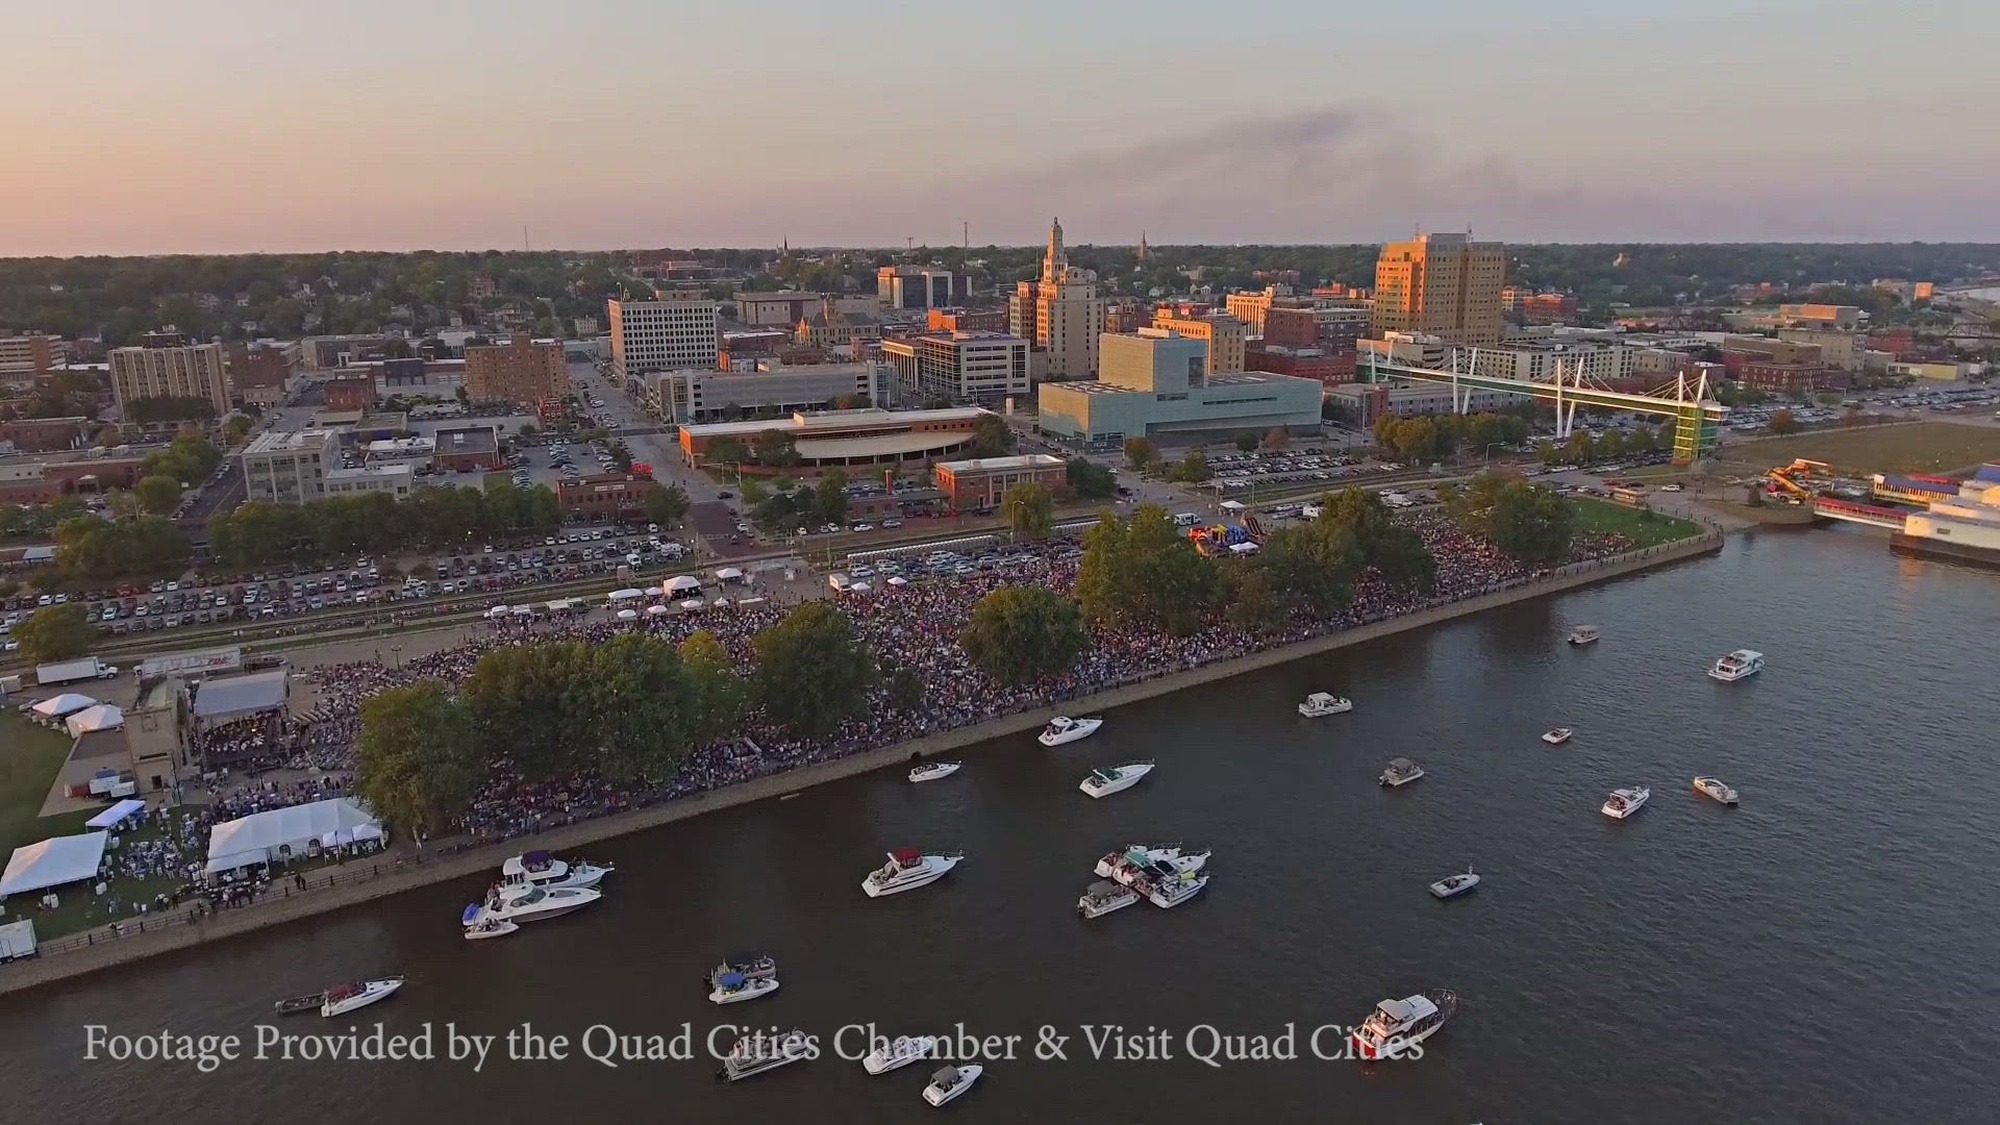 Meghan Peterson has lived in the Quad Cities most of her life. She loves working at ASC because it gives her the opportunity to raise her family in the Quad Cities. She shares some of her family's favorite things about living in the QC and why the QC is a great place to live!

Some footage provided by the Quad Cities Chamber and Visit Quad Cities.